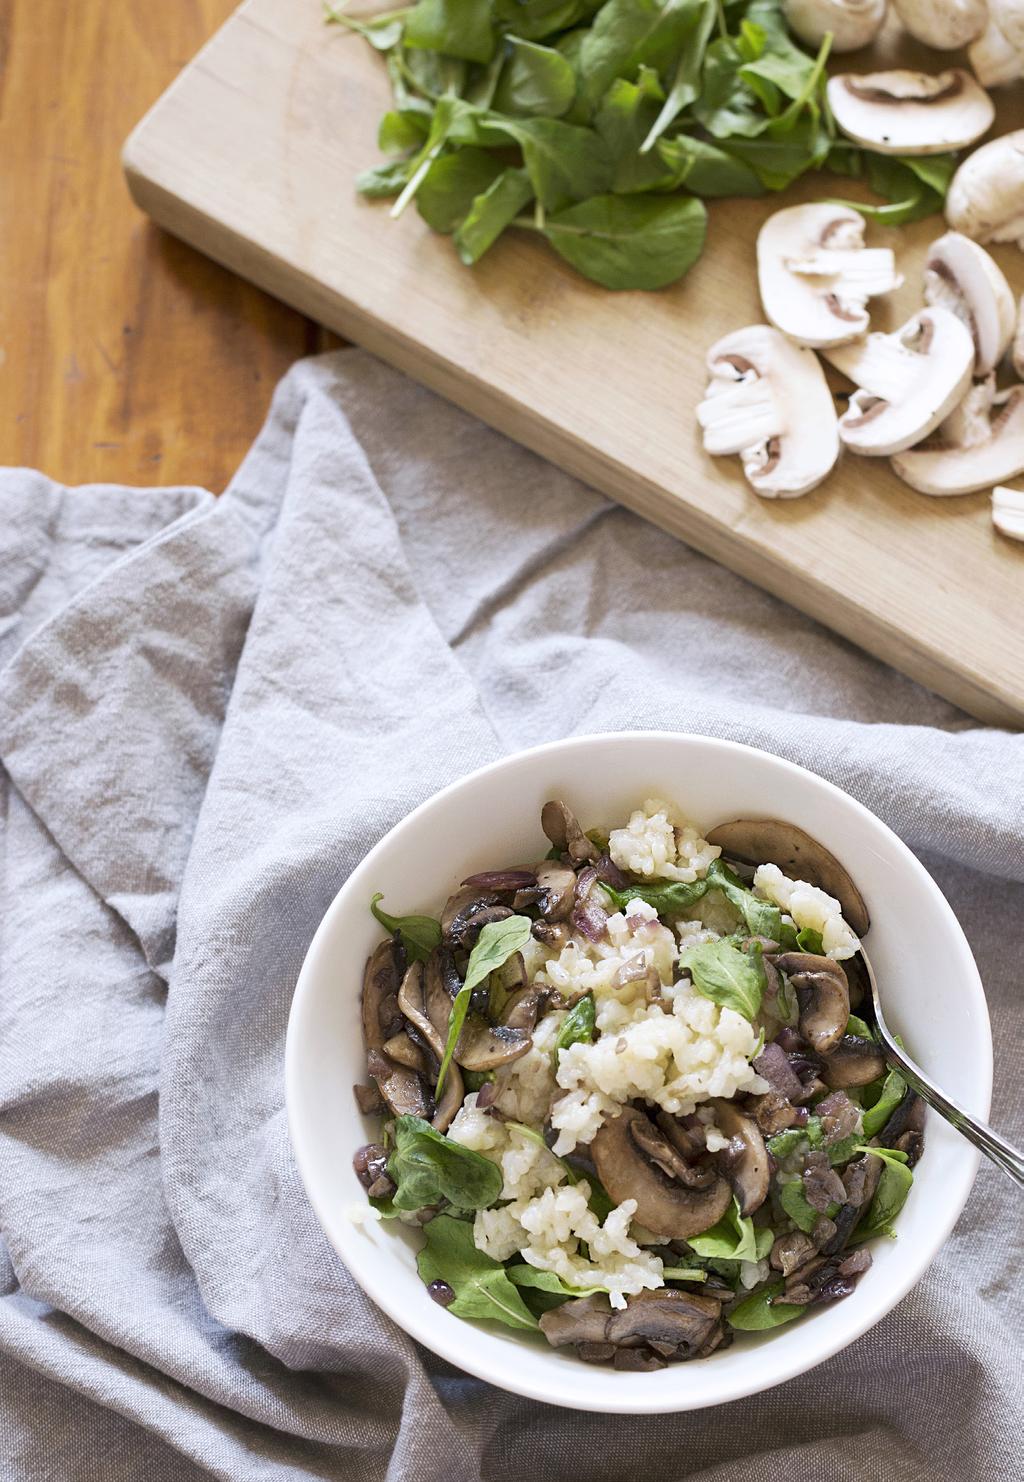 Mushroom and rocket risotto By Geoff Scott Serves 4 1 L Vegetable stock, use a stock powder 2 Tbsp Rice bran oil 1/2 C Onion, finely diced 300 g Risotto rice 1/4 C White wine 1 Tbsp Rice bran oil 200